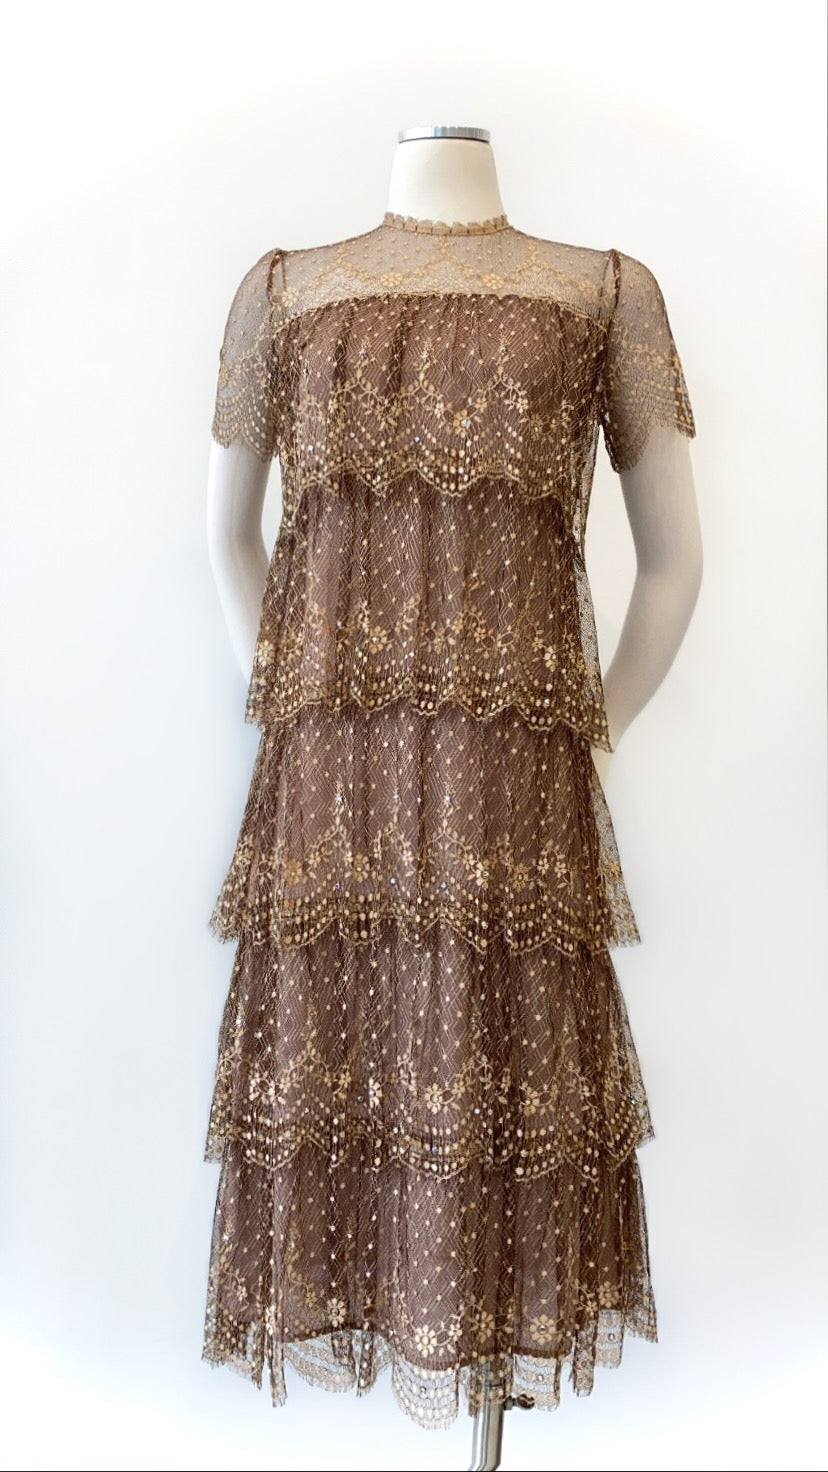 Vintage - Layered Lace Dress with Delicate Rhinestone Embellishment